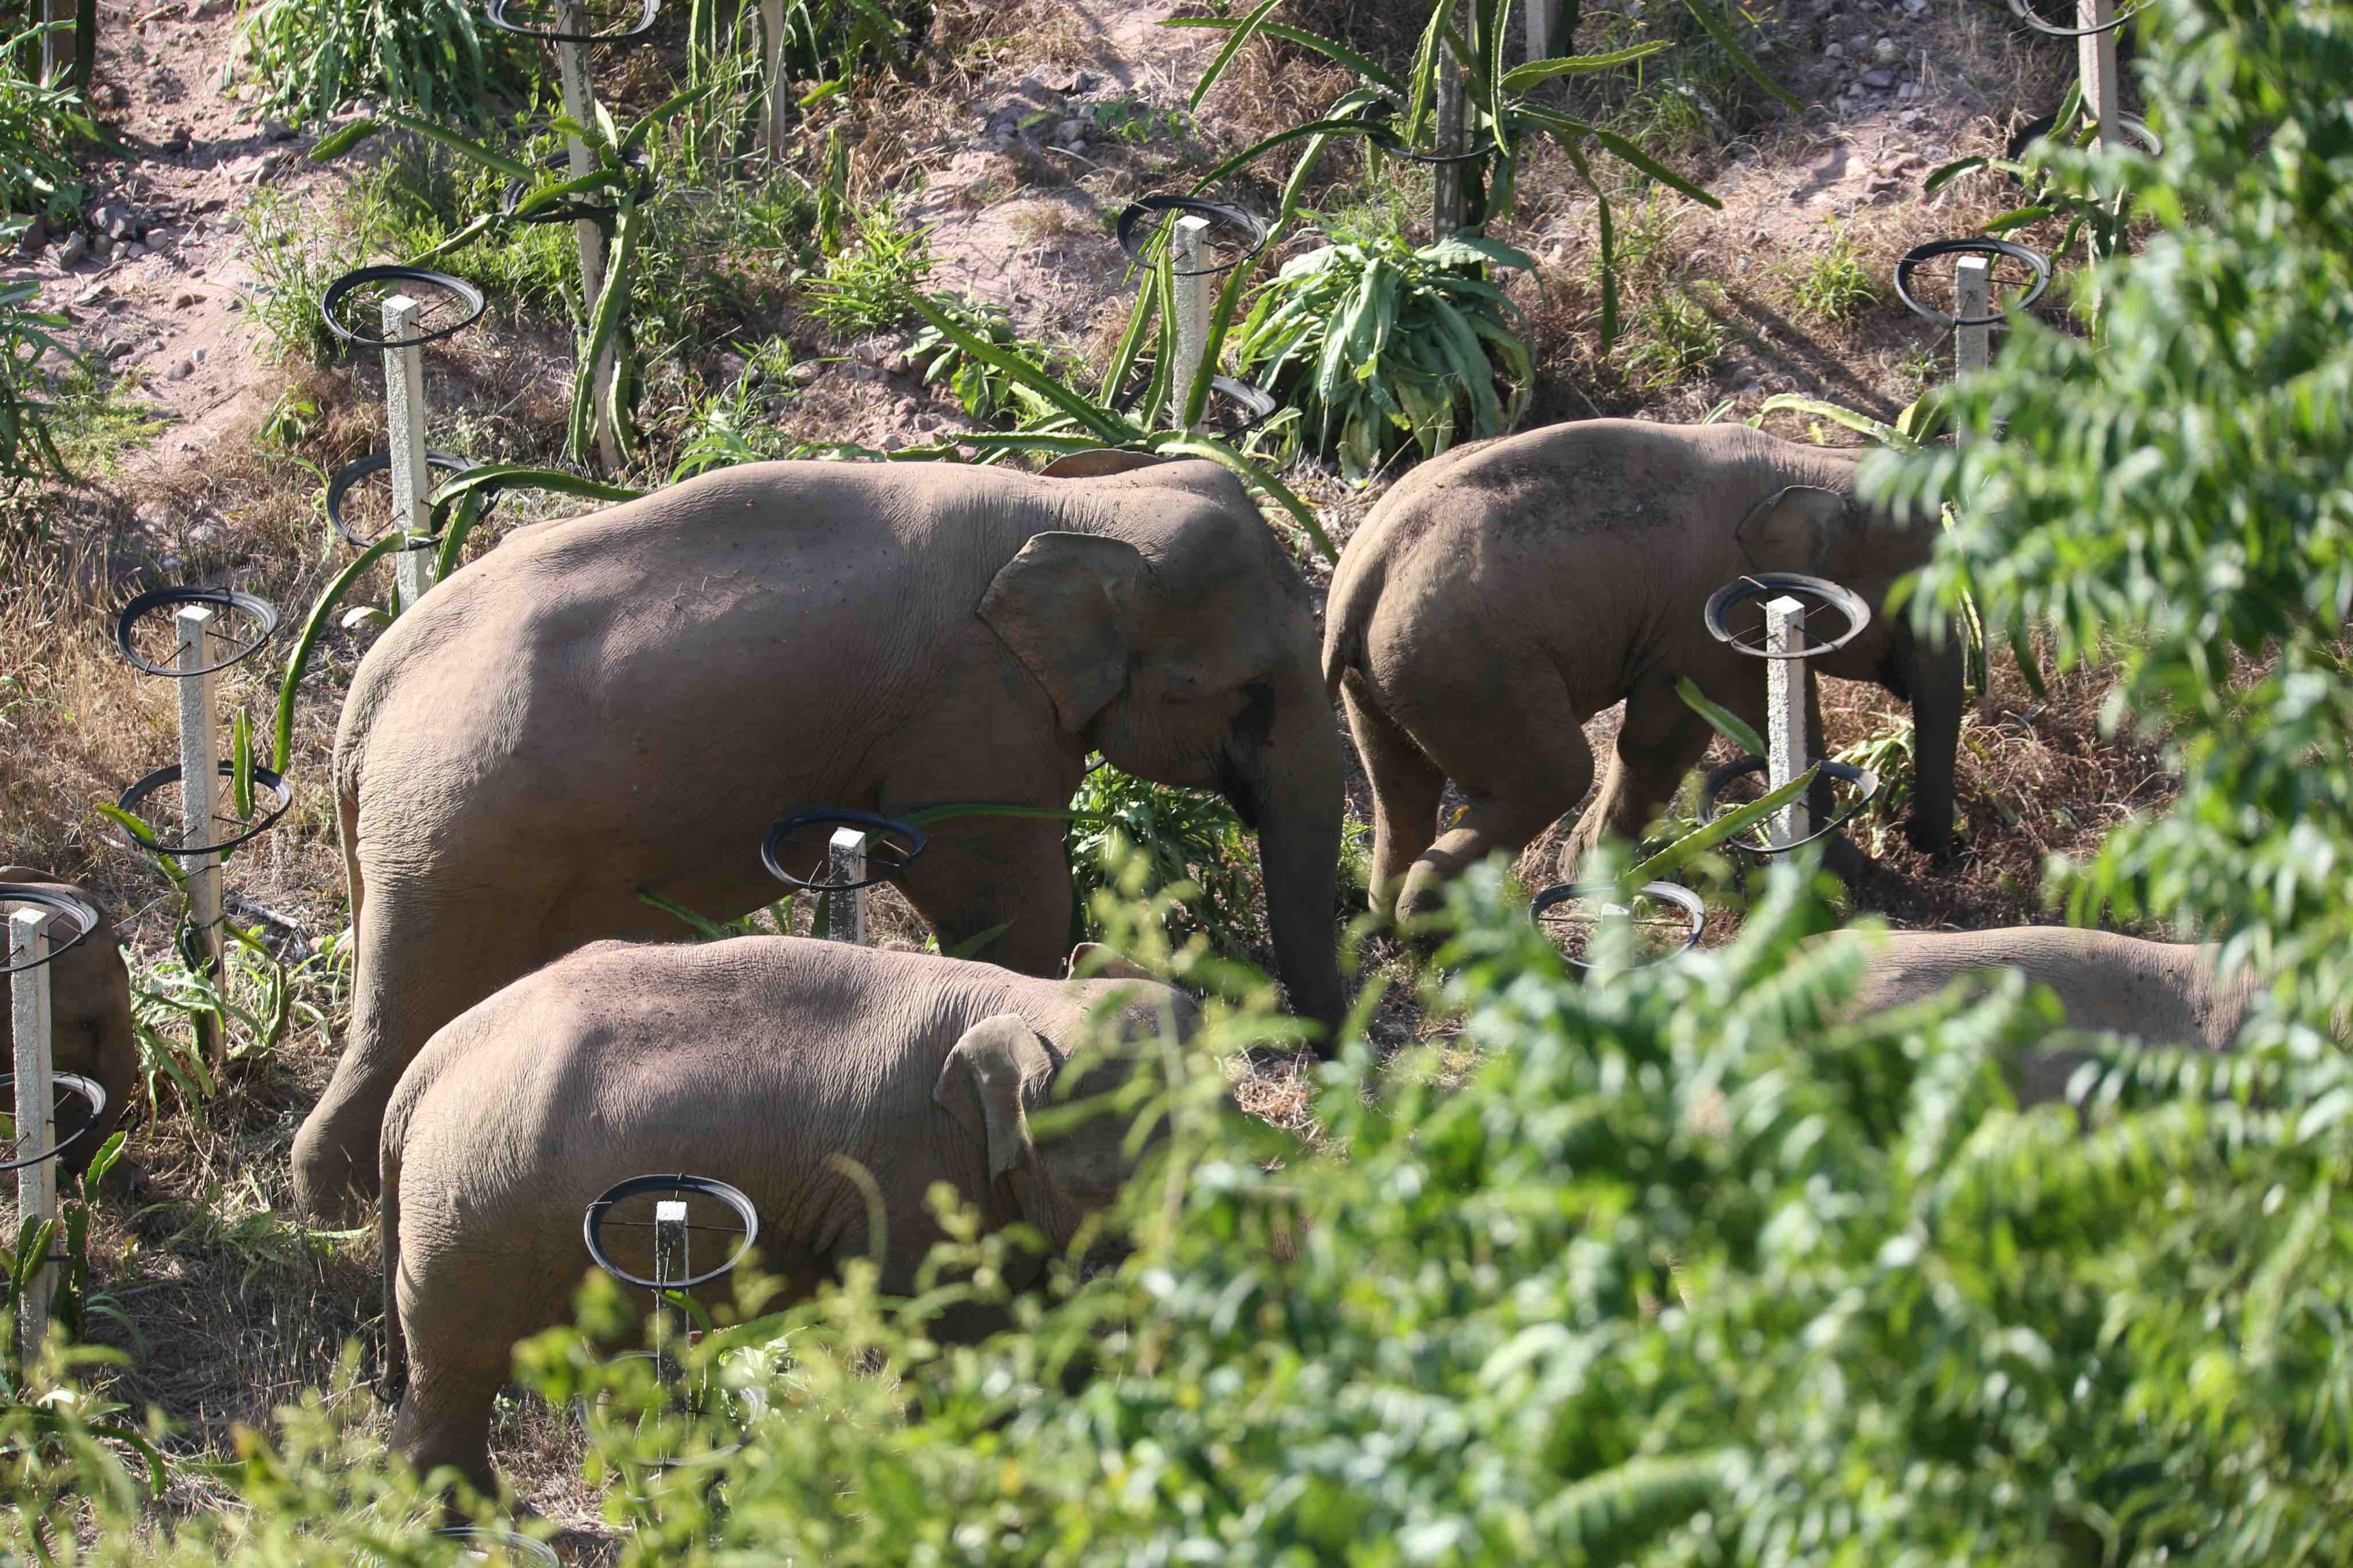 A Herd Of Wild Elephants That’s Been Wandering Across China Laid Down And Took A Nap After 500km